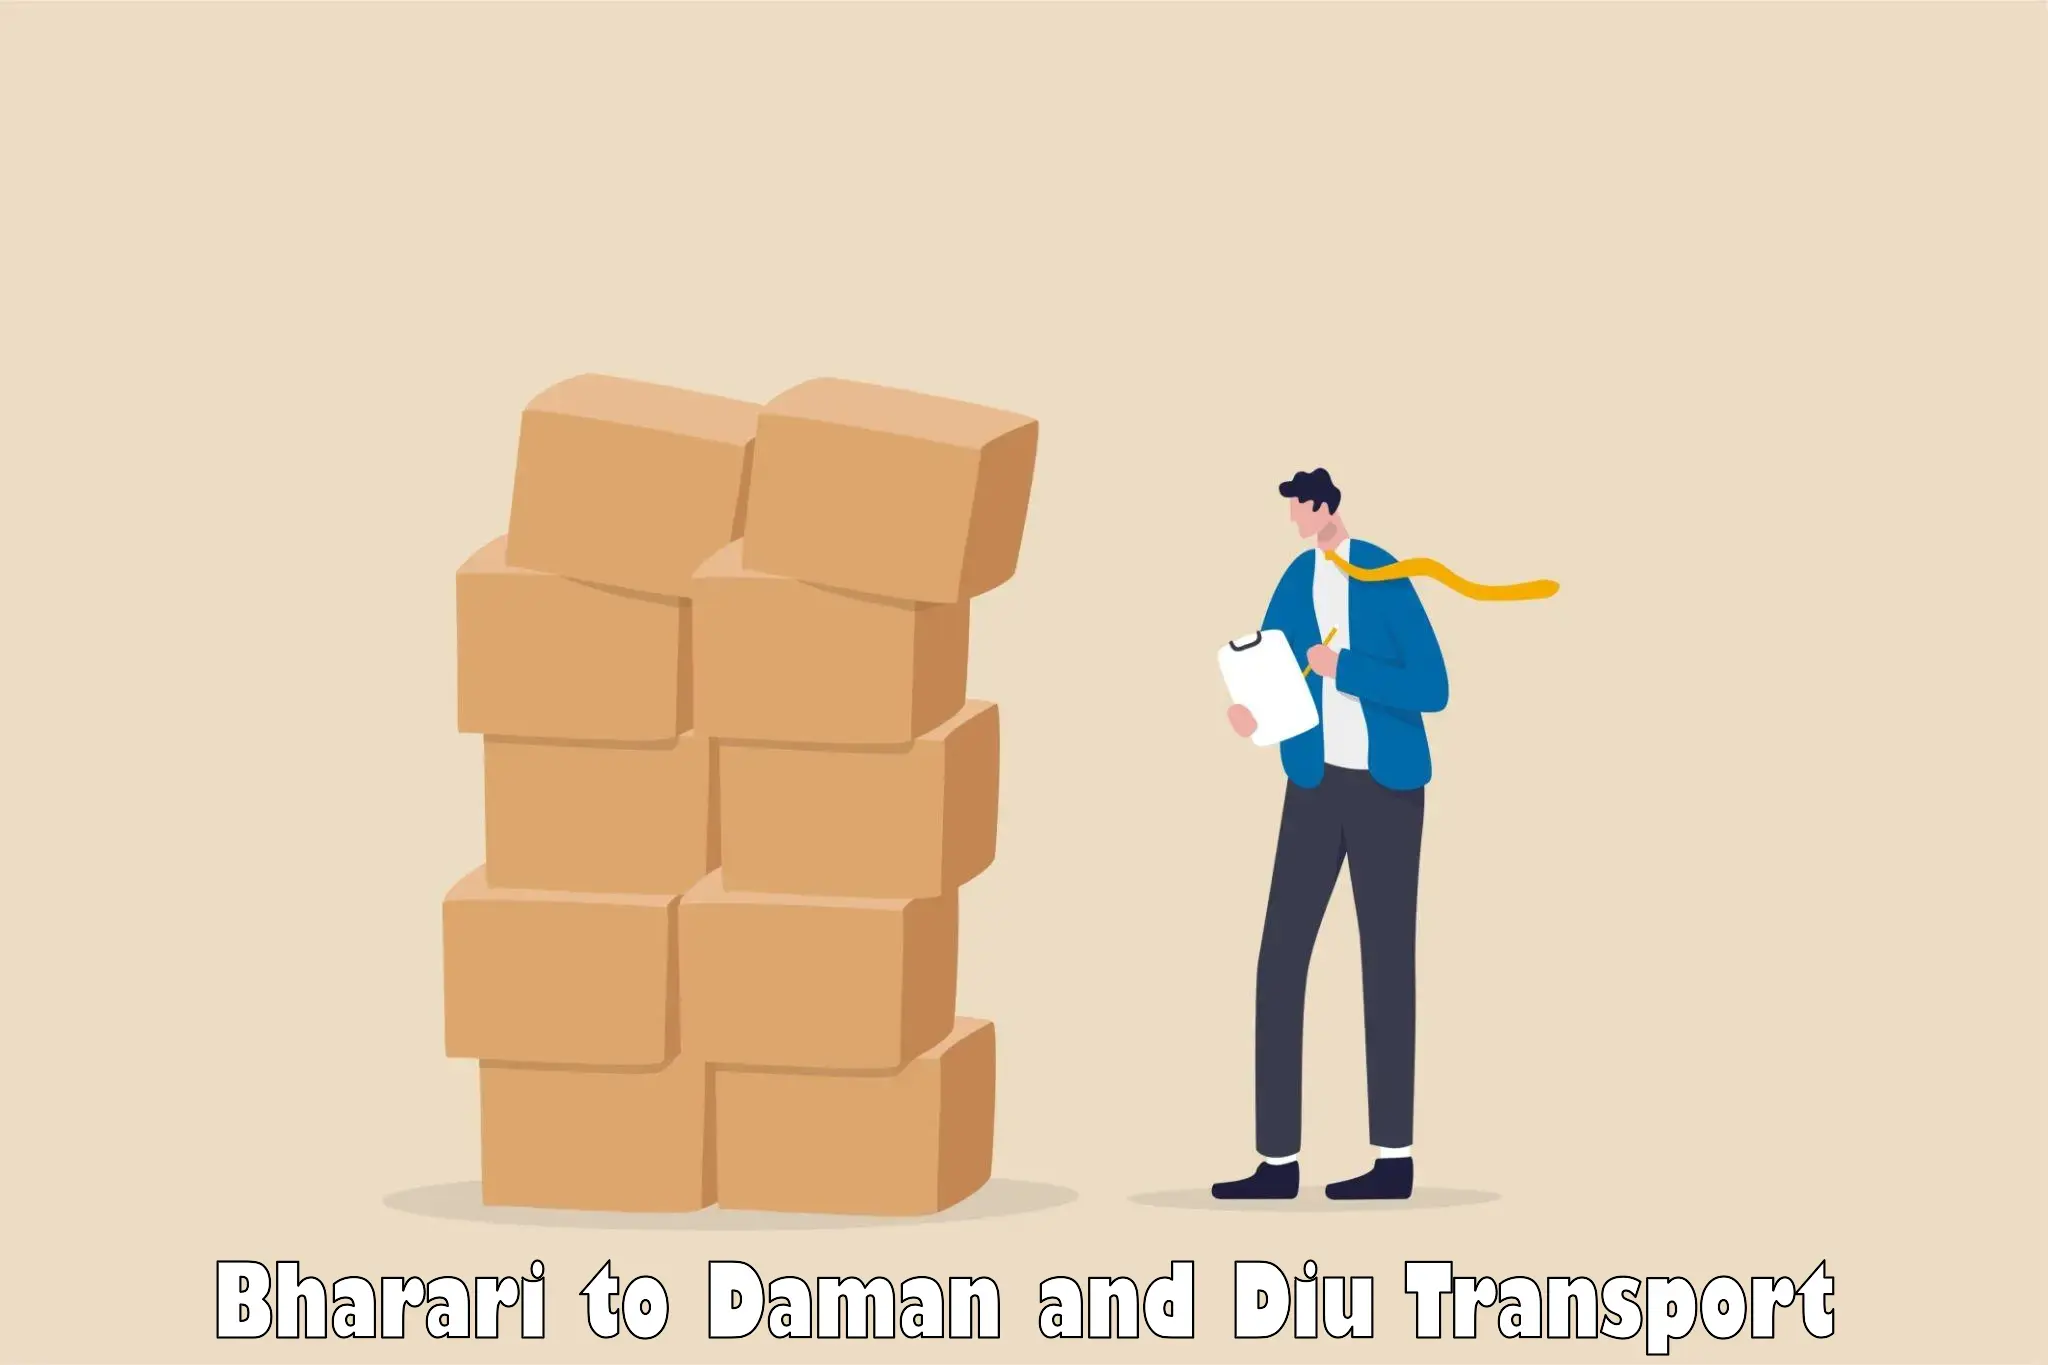 Daily parcel service transport Bharari to Diu